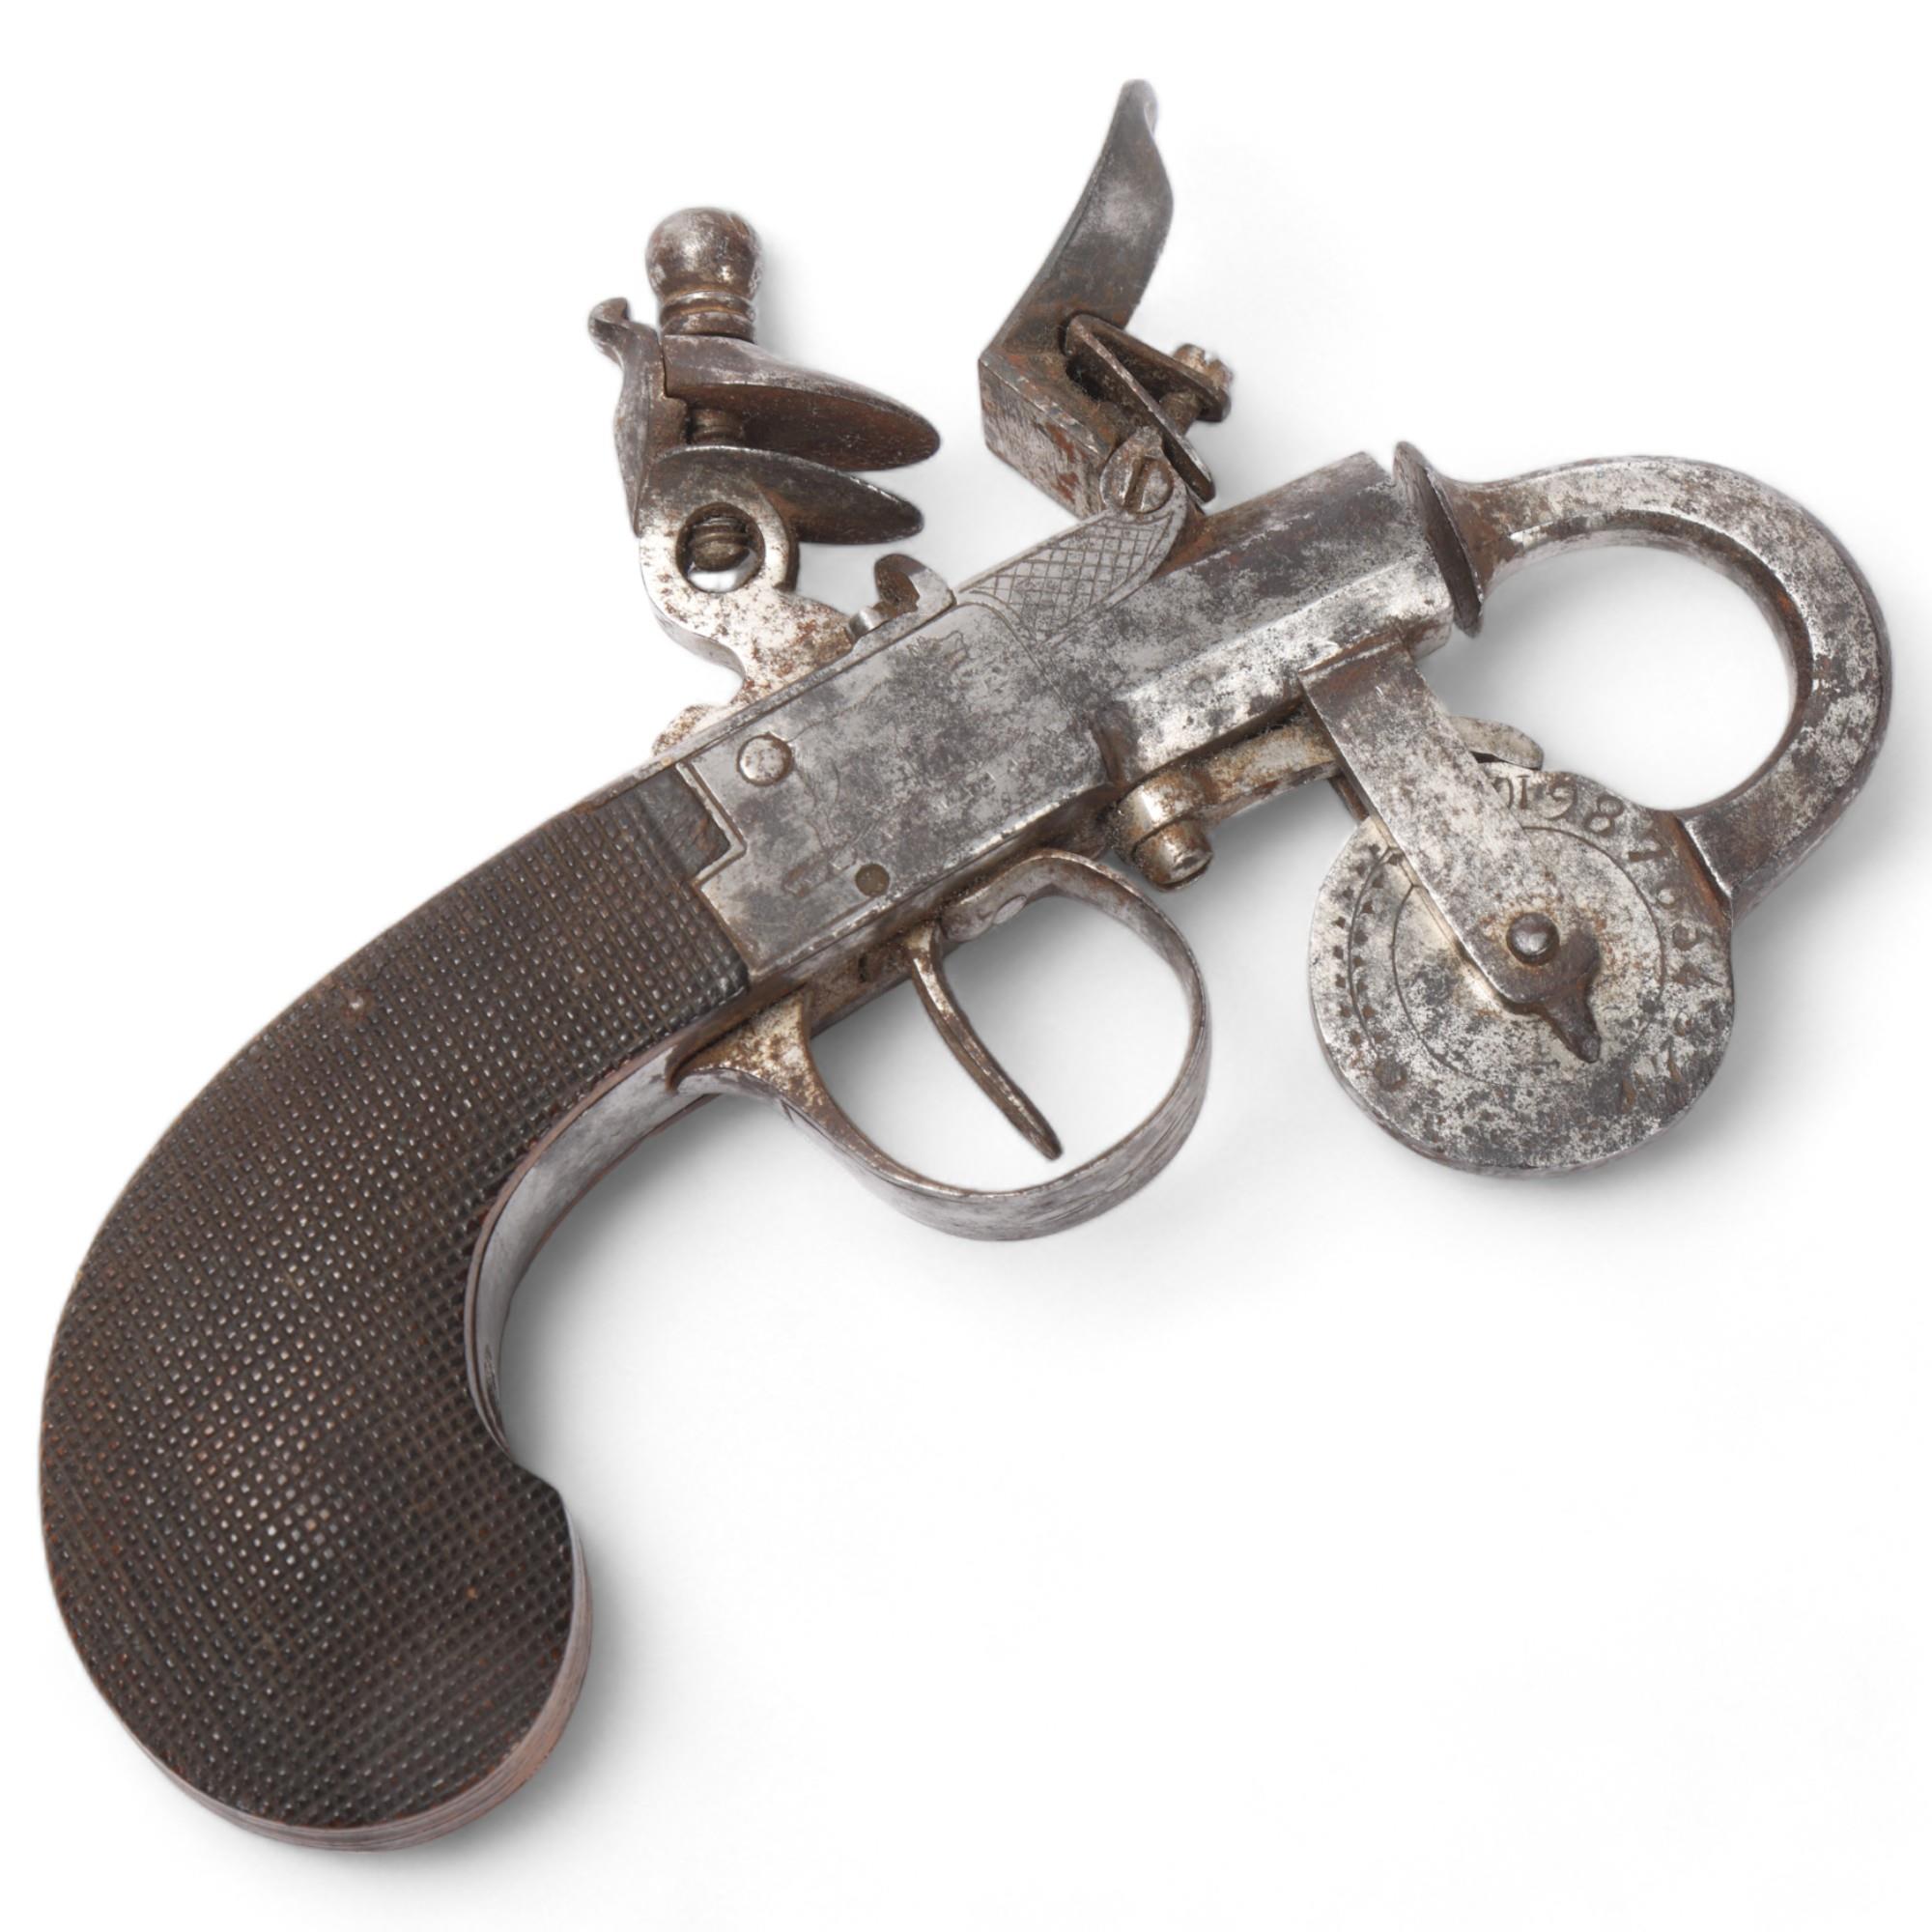 An Antique flintlock powder tester, the lock panels engraved with animals and carved wood handle,